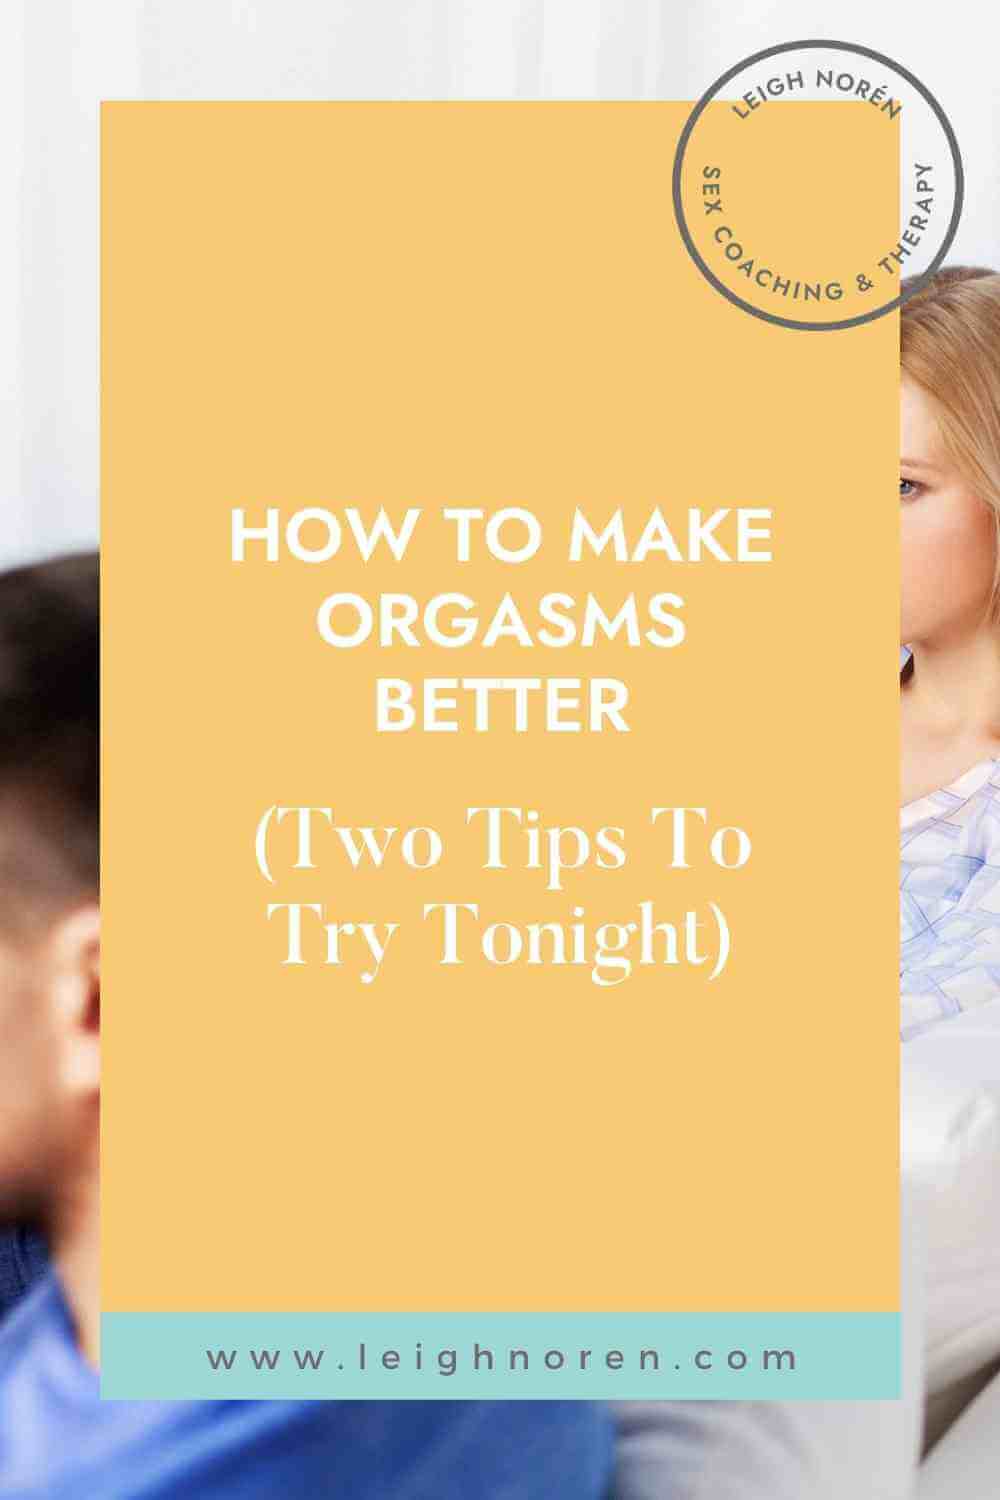 How To Make Orgasms Better: Two Tips To Try Tonight